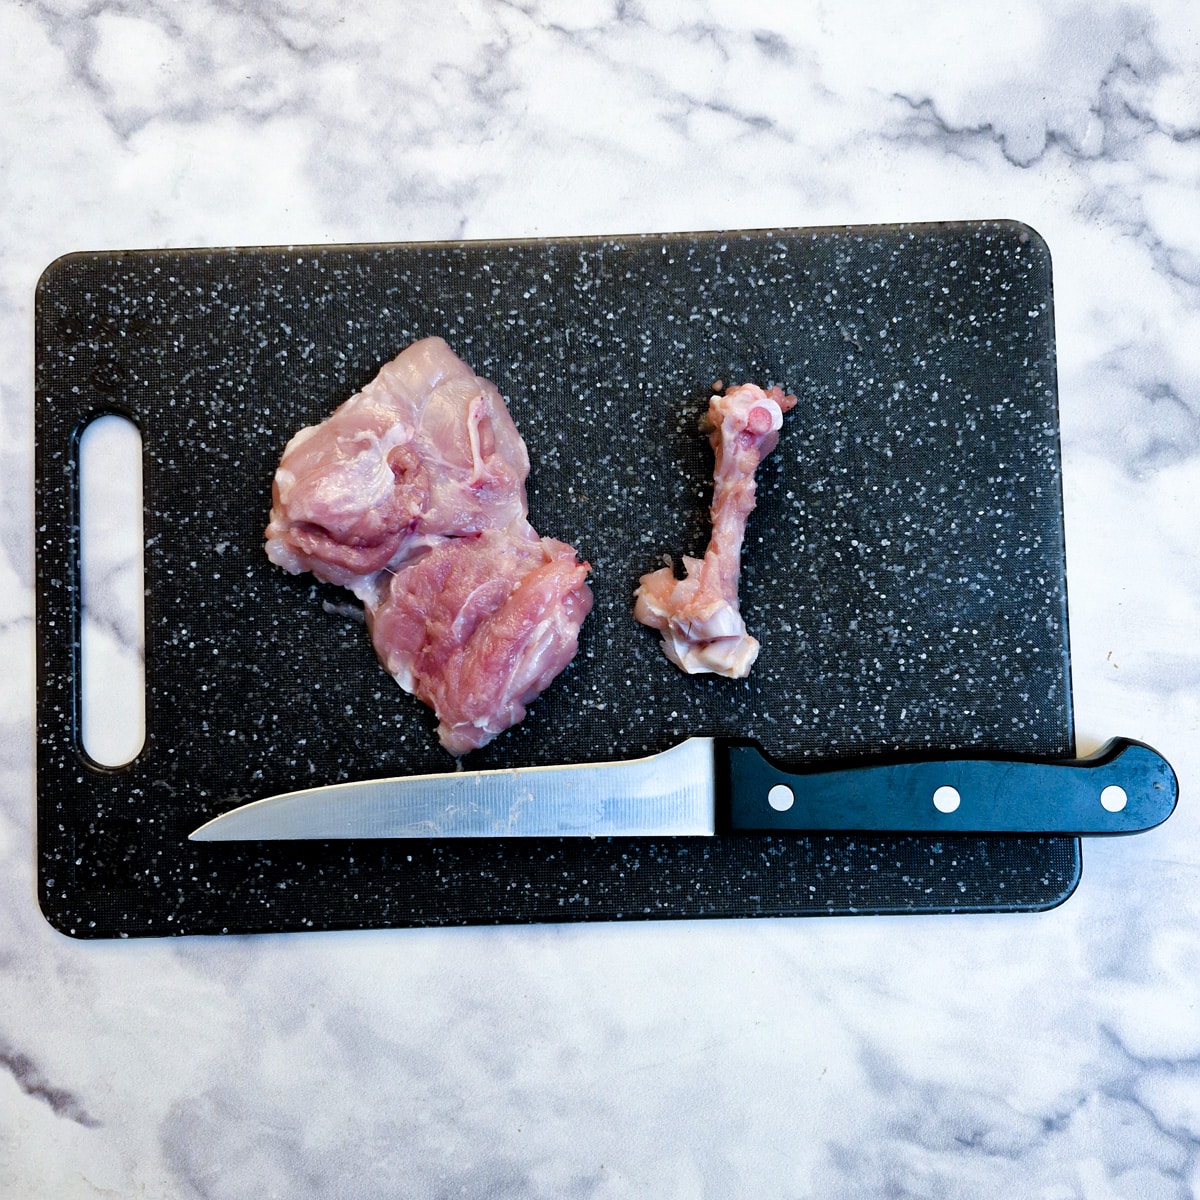 A deboned chicken thigh on a chopping board next to the bone that has been removed.